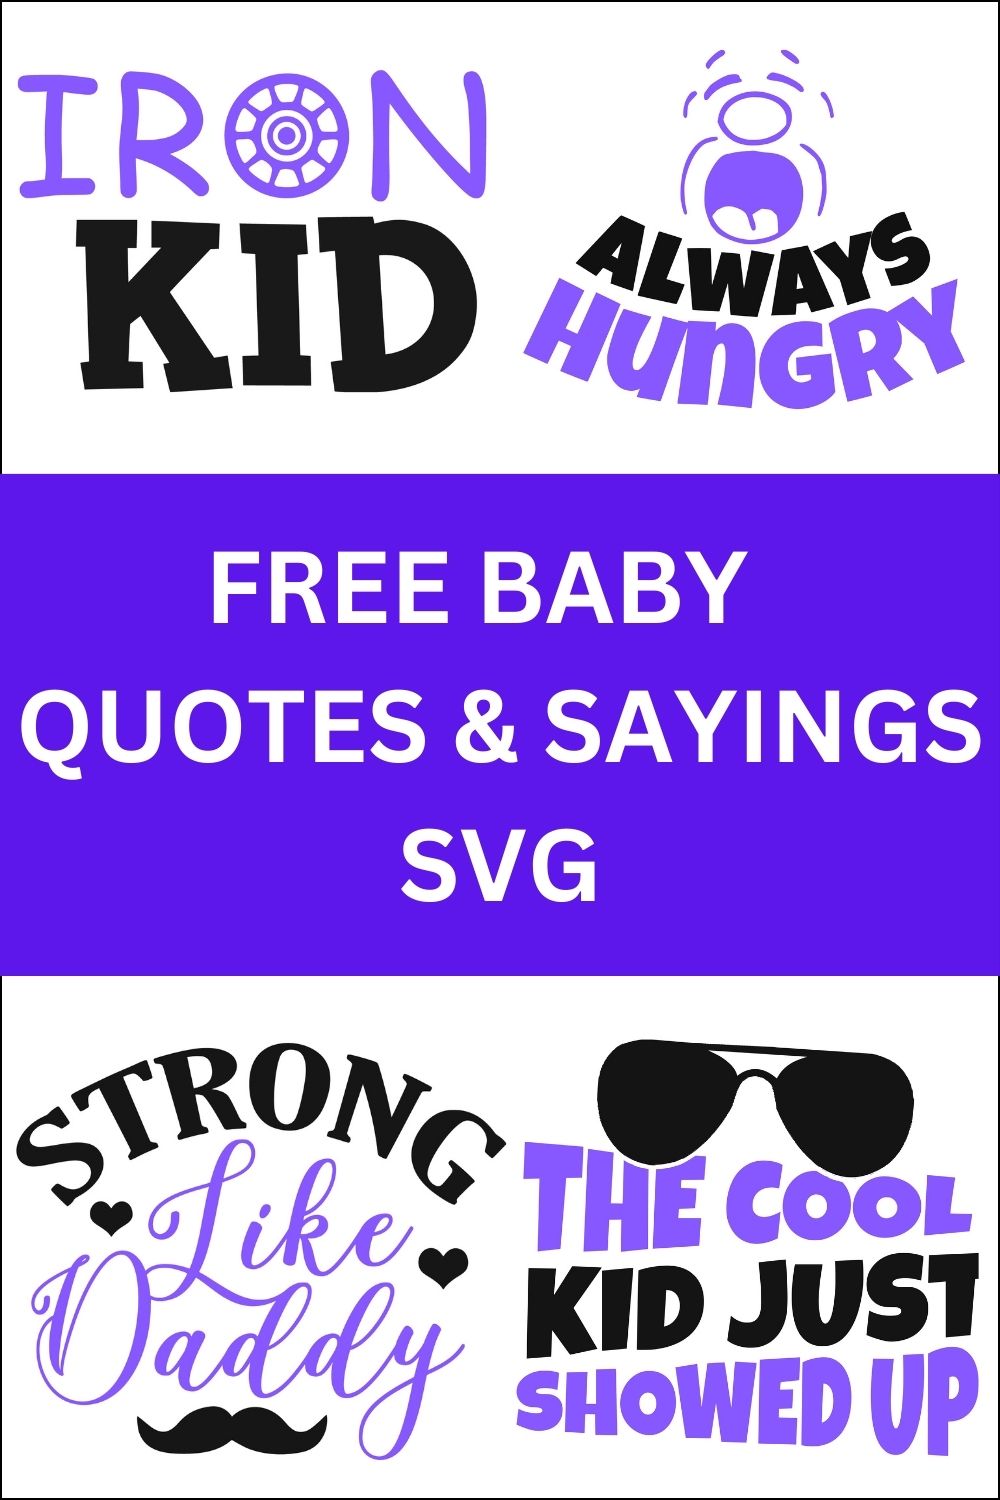 Baby Quotes & Sayings SVG, Toddler, kids sayings, quotes, cricut, download, svg, clipart, designs, baby, free, funny, cool kids